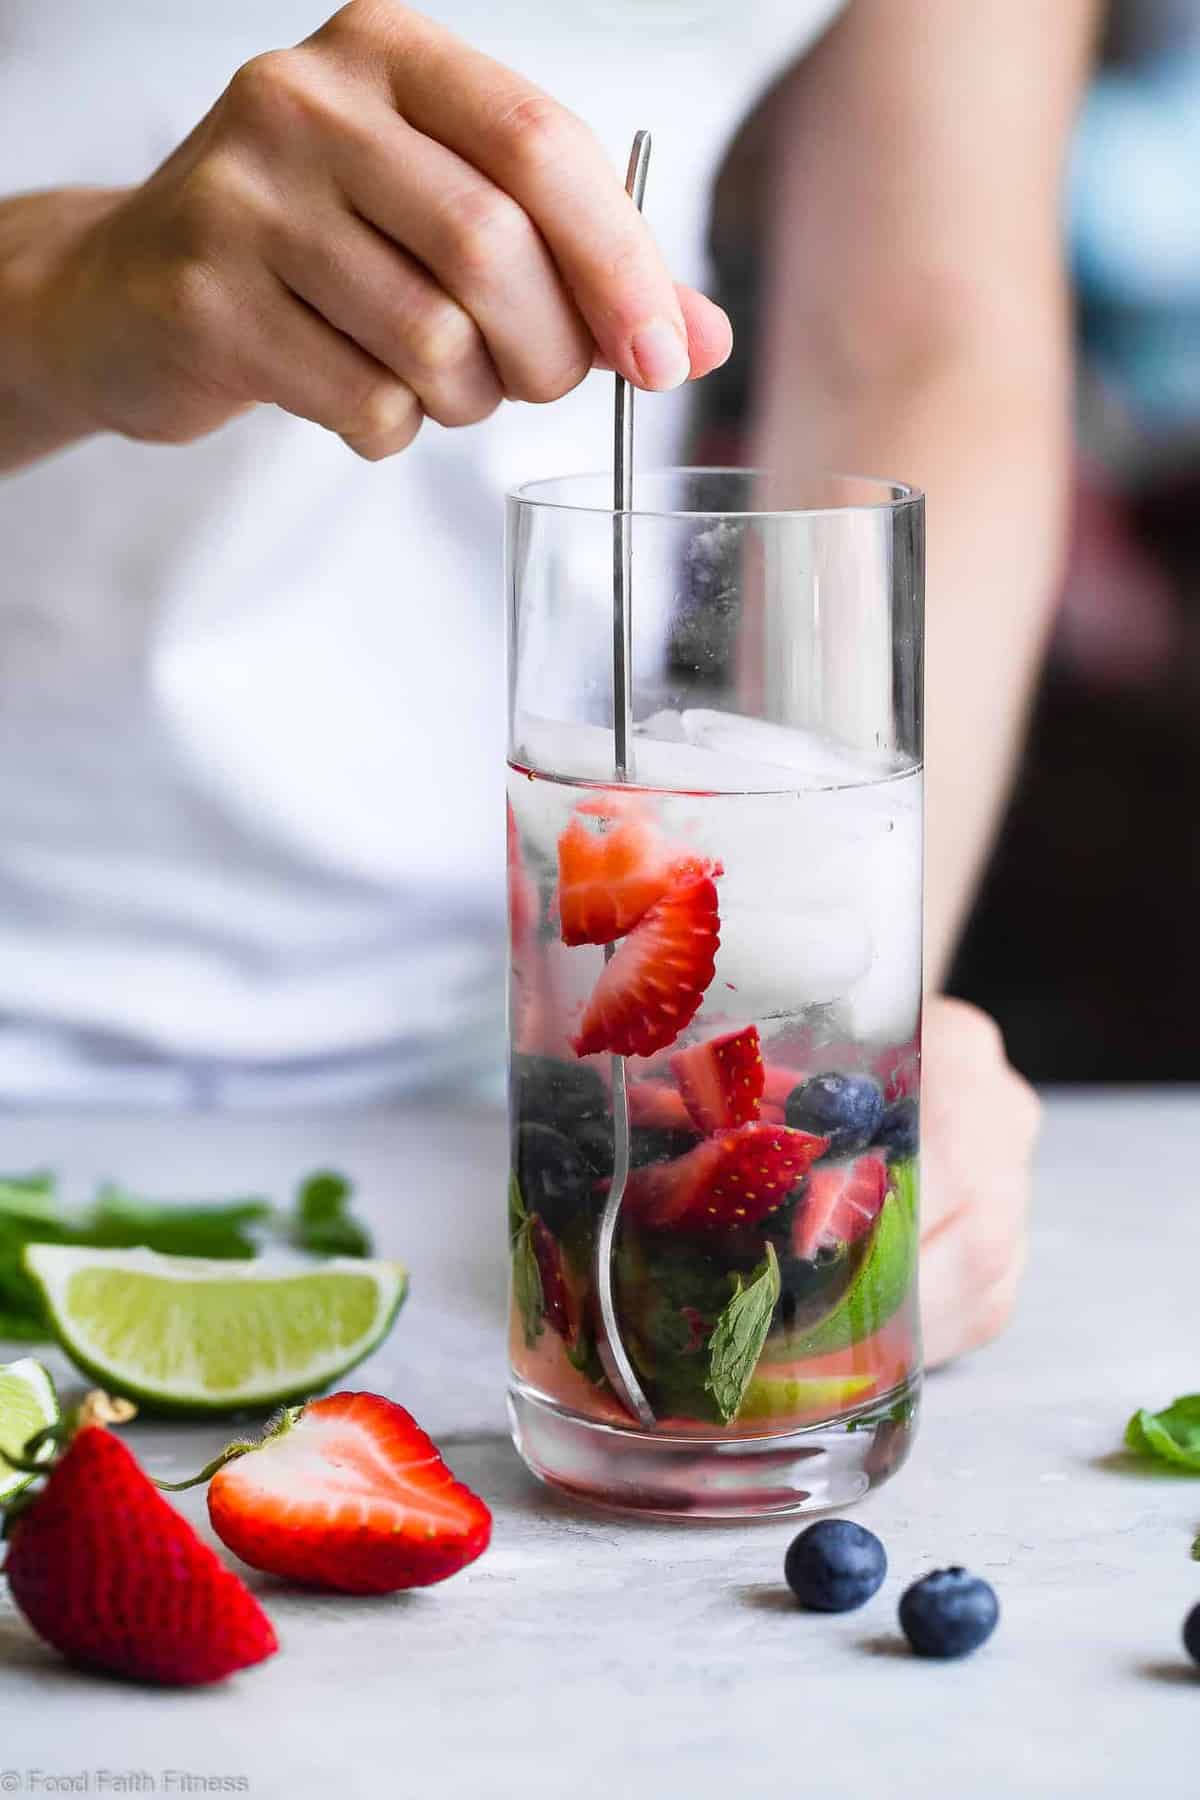 Red White and Blueberry Coconut Mojitos - This strawberry, coconut blueberry mojito recipe is a healthier, gluten free, easy Summer drink with only 130 calories and no sugar! Perfect for July 4th! | #Foodfaithfitness | #Mojito #July4th #Healthy #SugarFree #Glutenfree